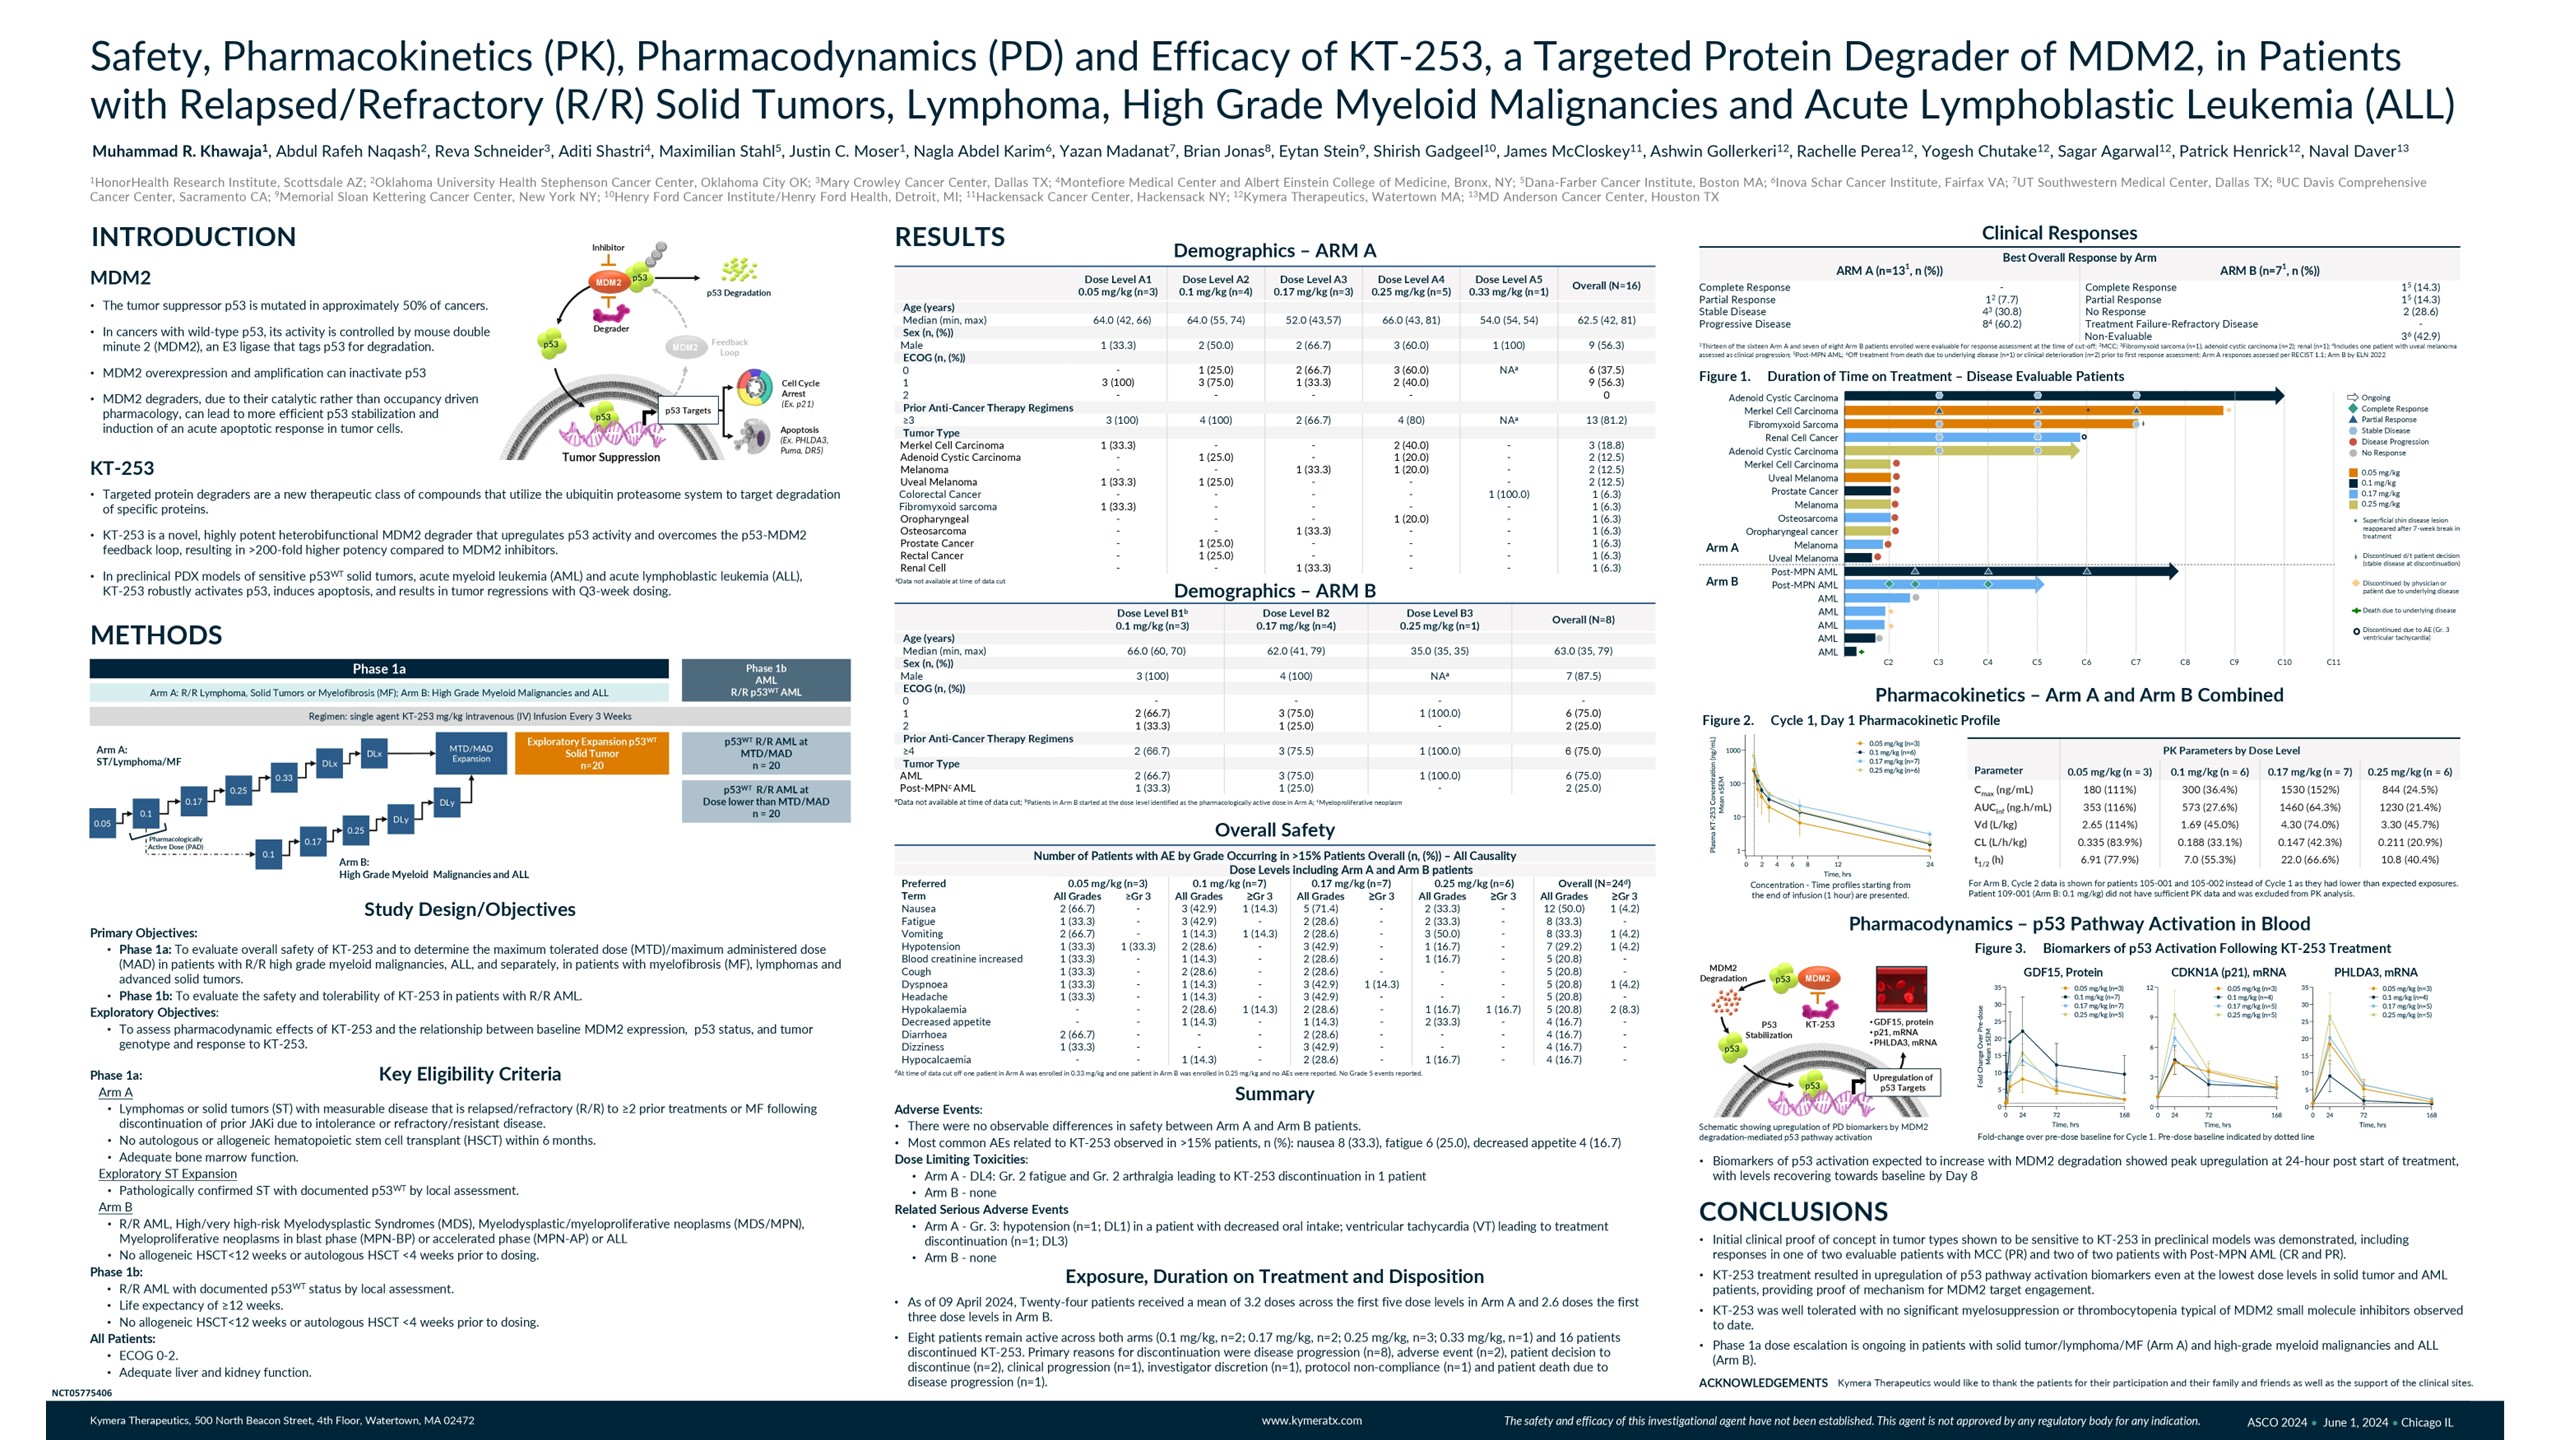 Safety, pharmacokinetics (PK), pharmacodynamics (PD) and efficacy of KT-253, a targeted protein degrader of MDM2, in patients with relapsed/refractory (R/R) solid tumors, lymphoma, high grade myeloid malignancies and acute lymphoblastic leukemia (ALL).